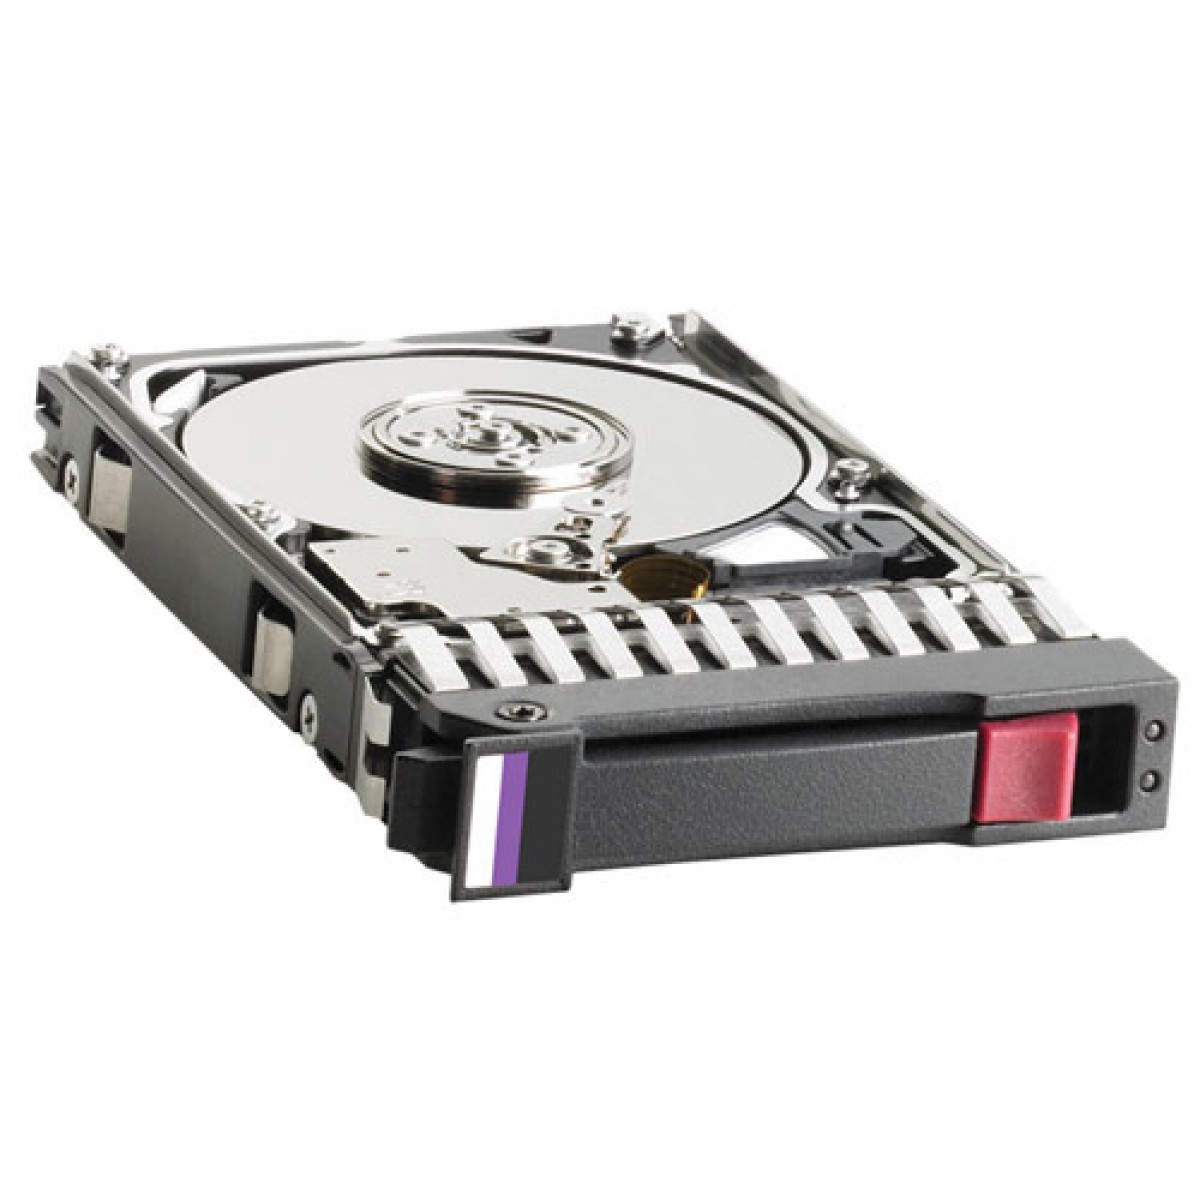 233806-001 | HP 18.2GB 10000RPM 80-Pin Ultra-160 SCSI 3.5-inch 1.0-inch Height Hot-pluggable Hard Drive